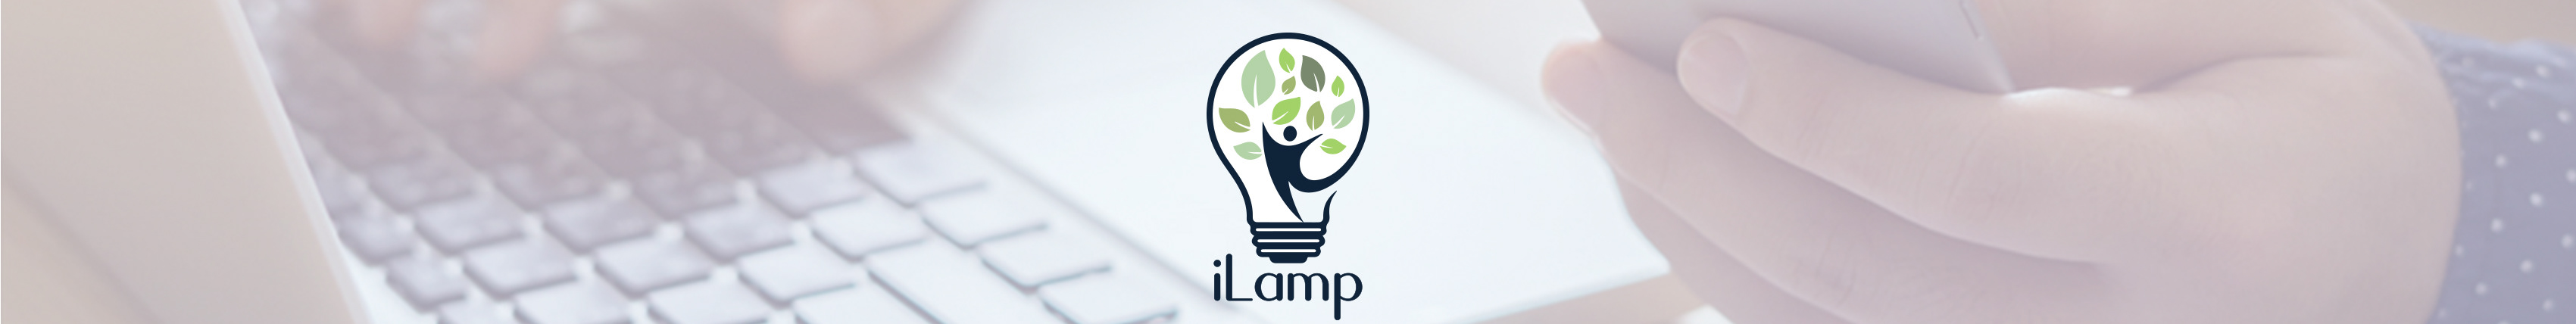 iLamp agency's profile banner